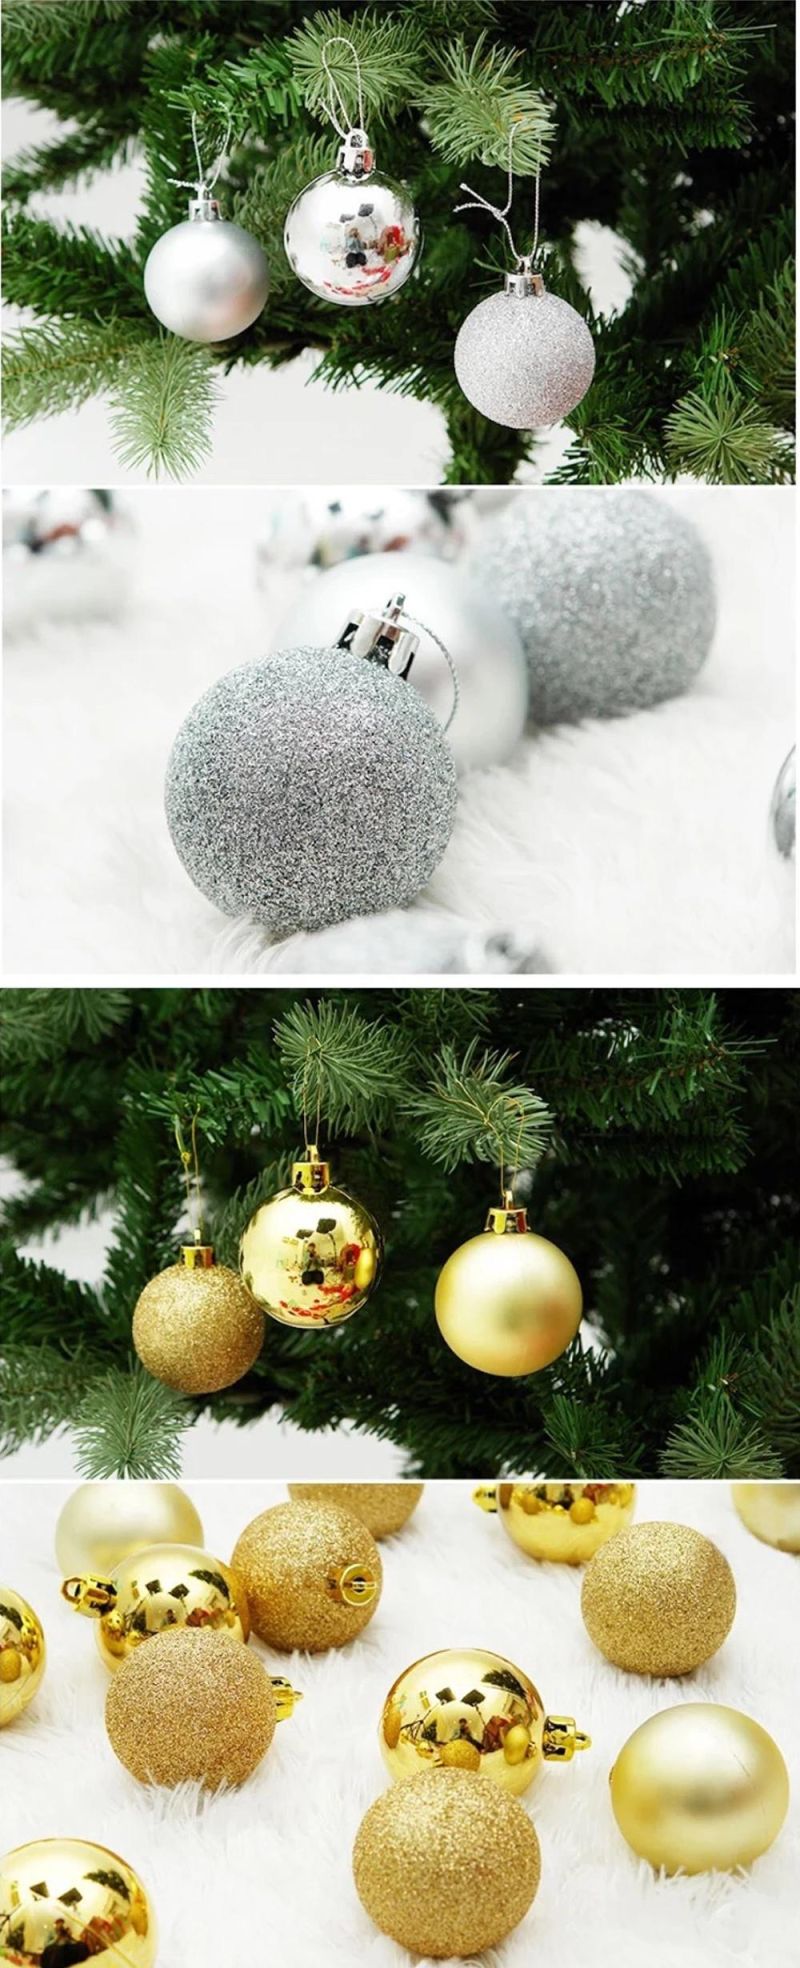 Colored Tree Hang Balls Decor Wholesale Clear Plastic Decorations Ornaments Christmas Ball